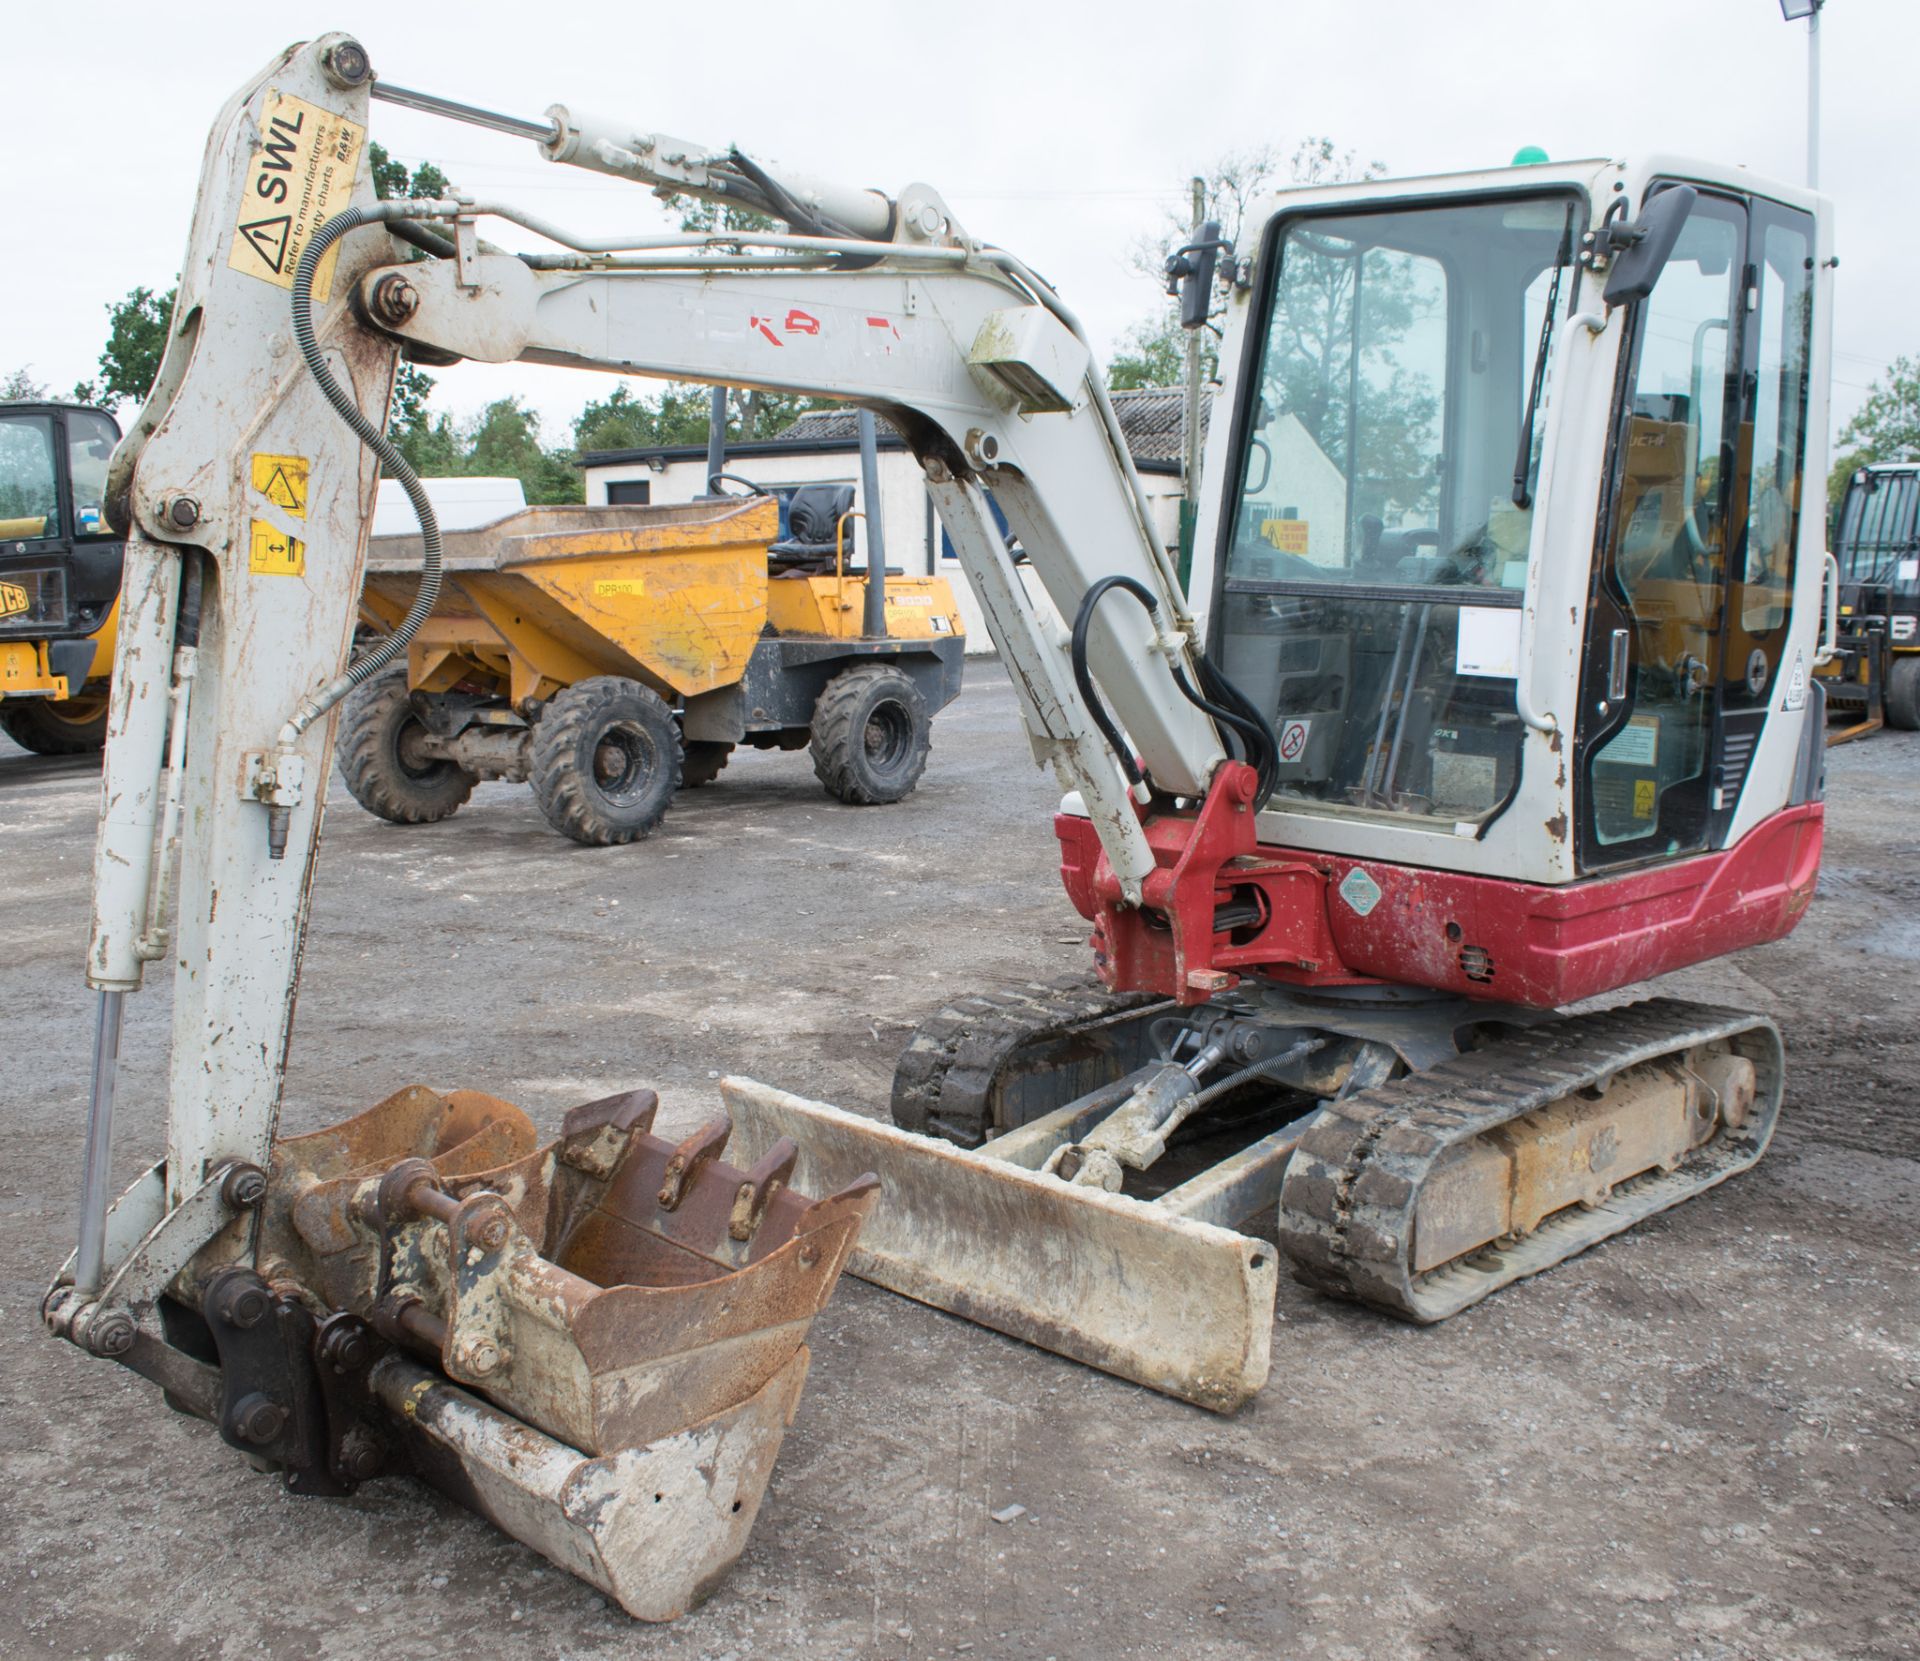 Takeuchi TB 228 2.8 tonne rubber tracked mini excavator  Year: 2014 S/N: 122803281 Recorded Hours: